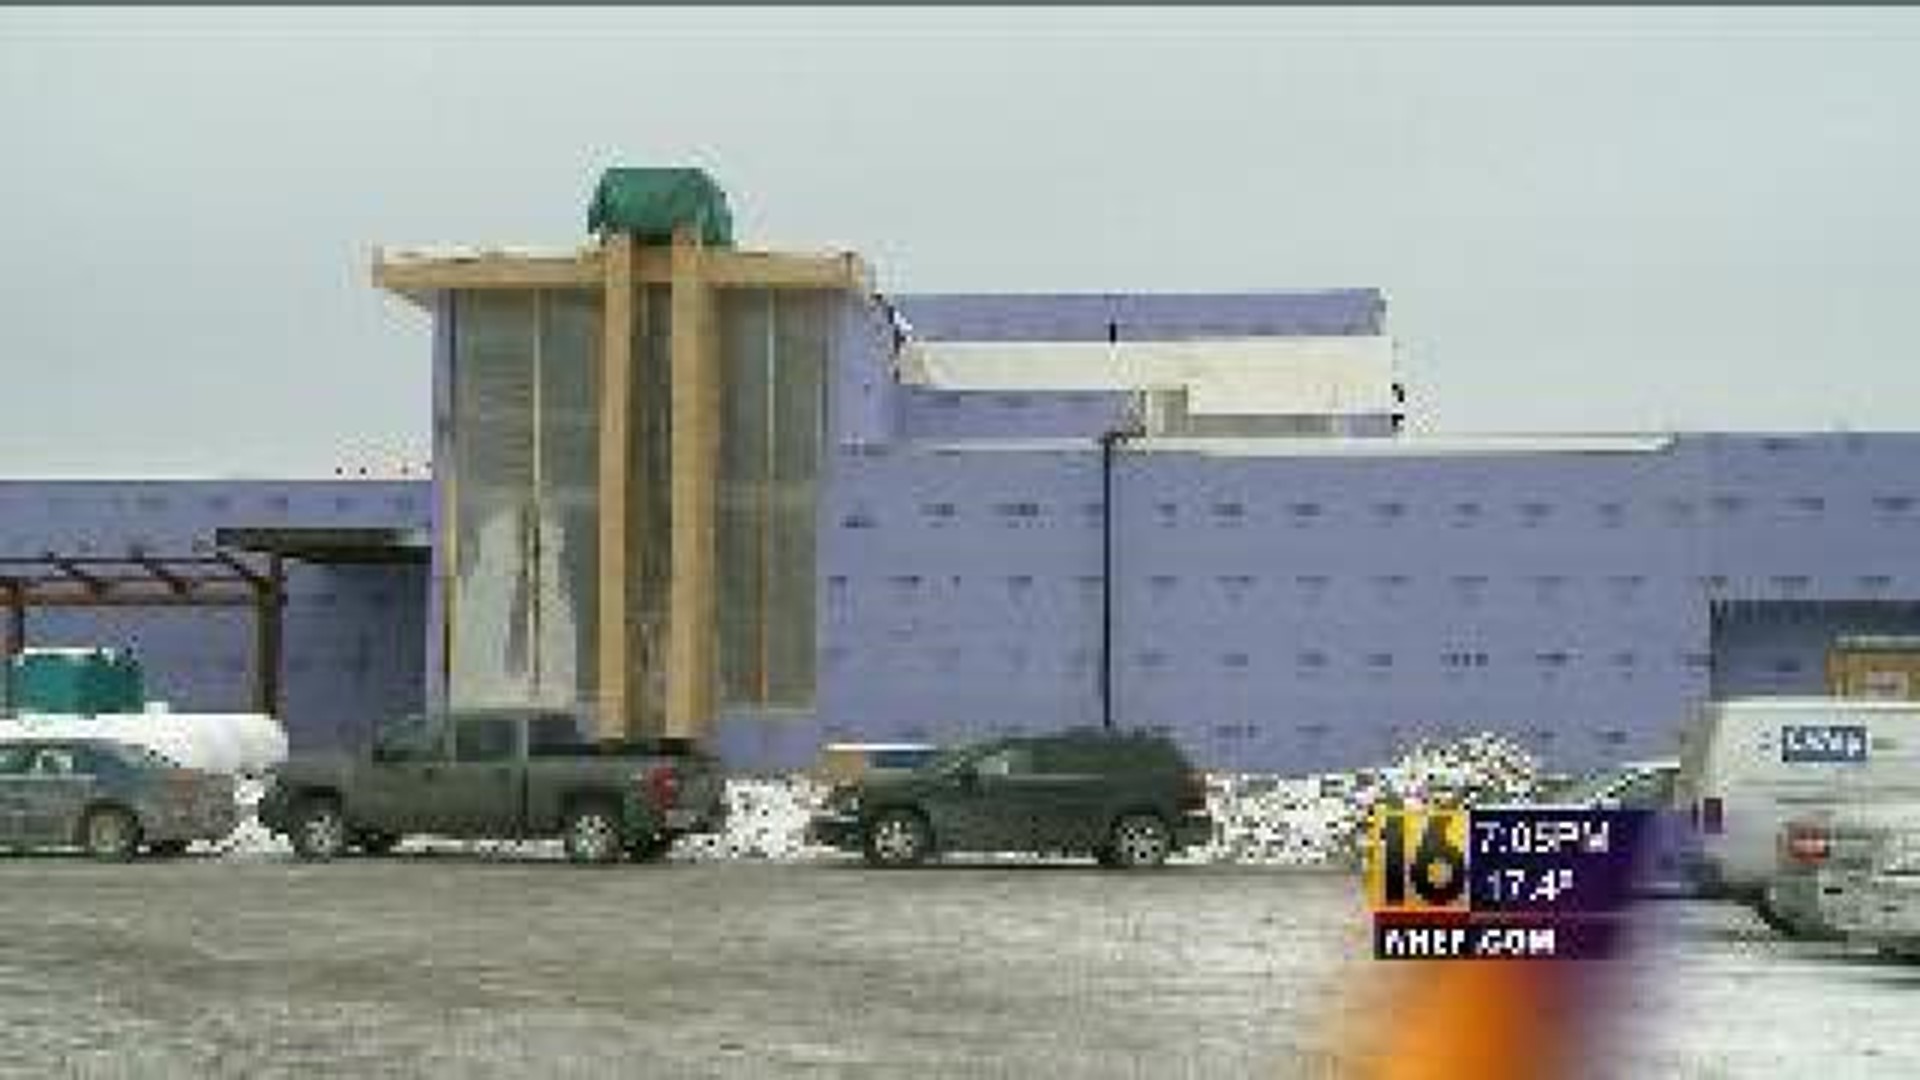 New Hospital in Susquehanna County Near Completion